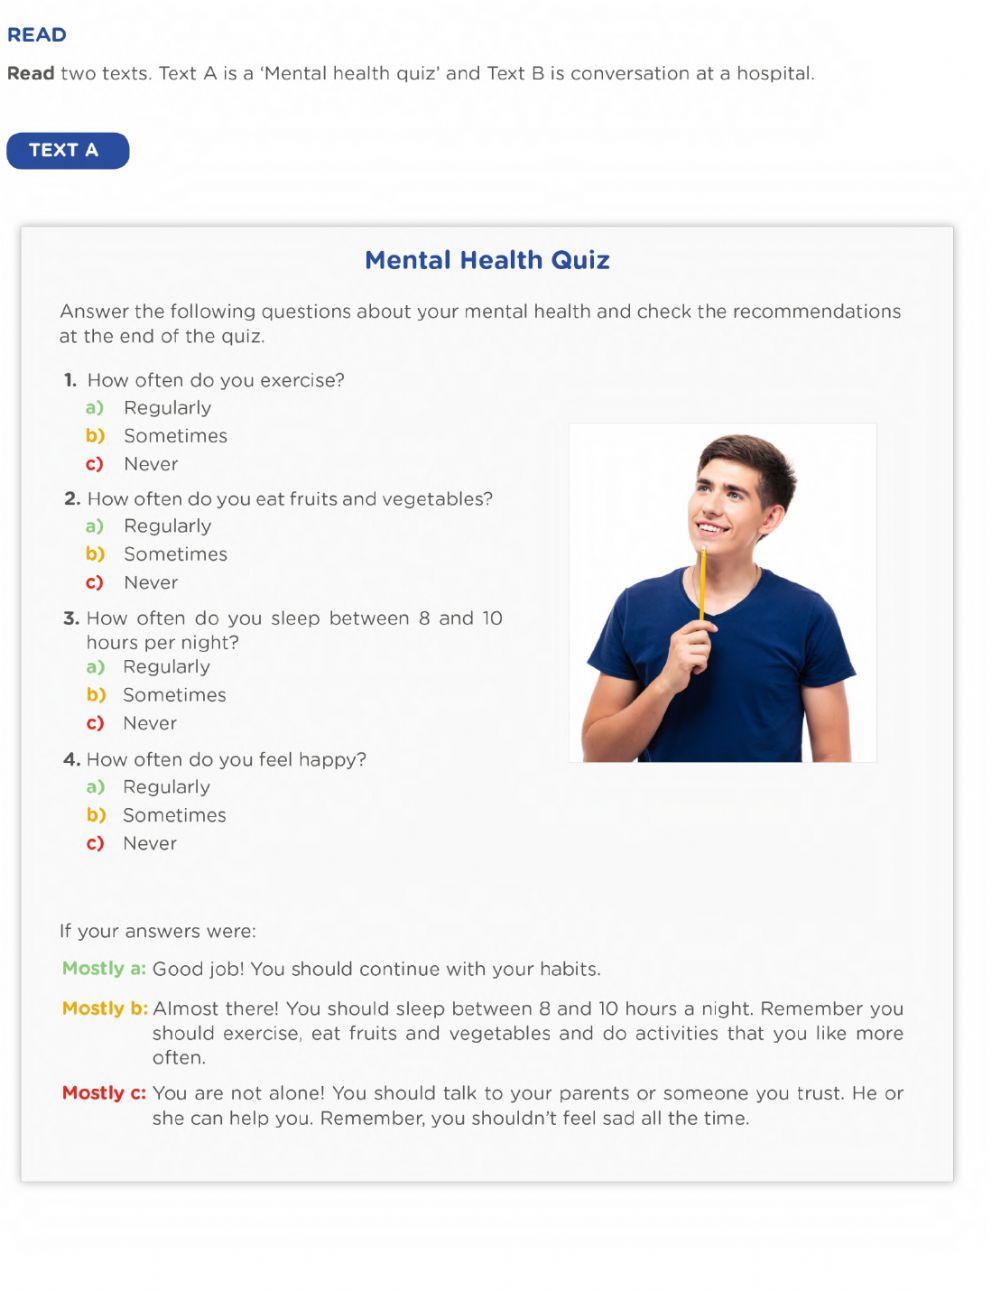 Improve your mental health - W-13 (A2)